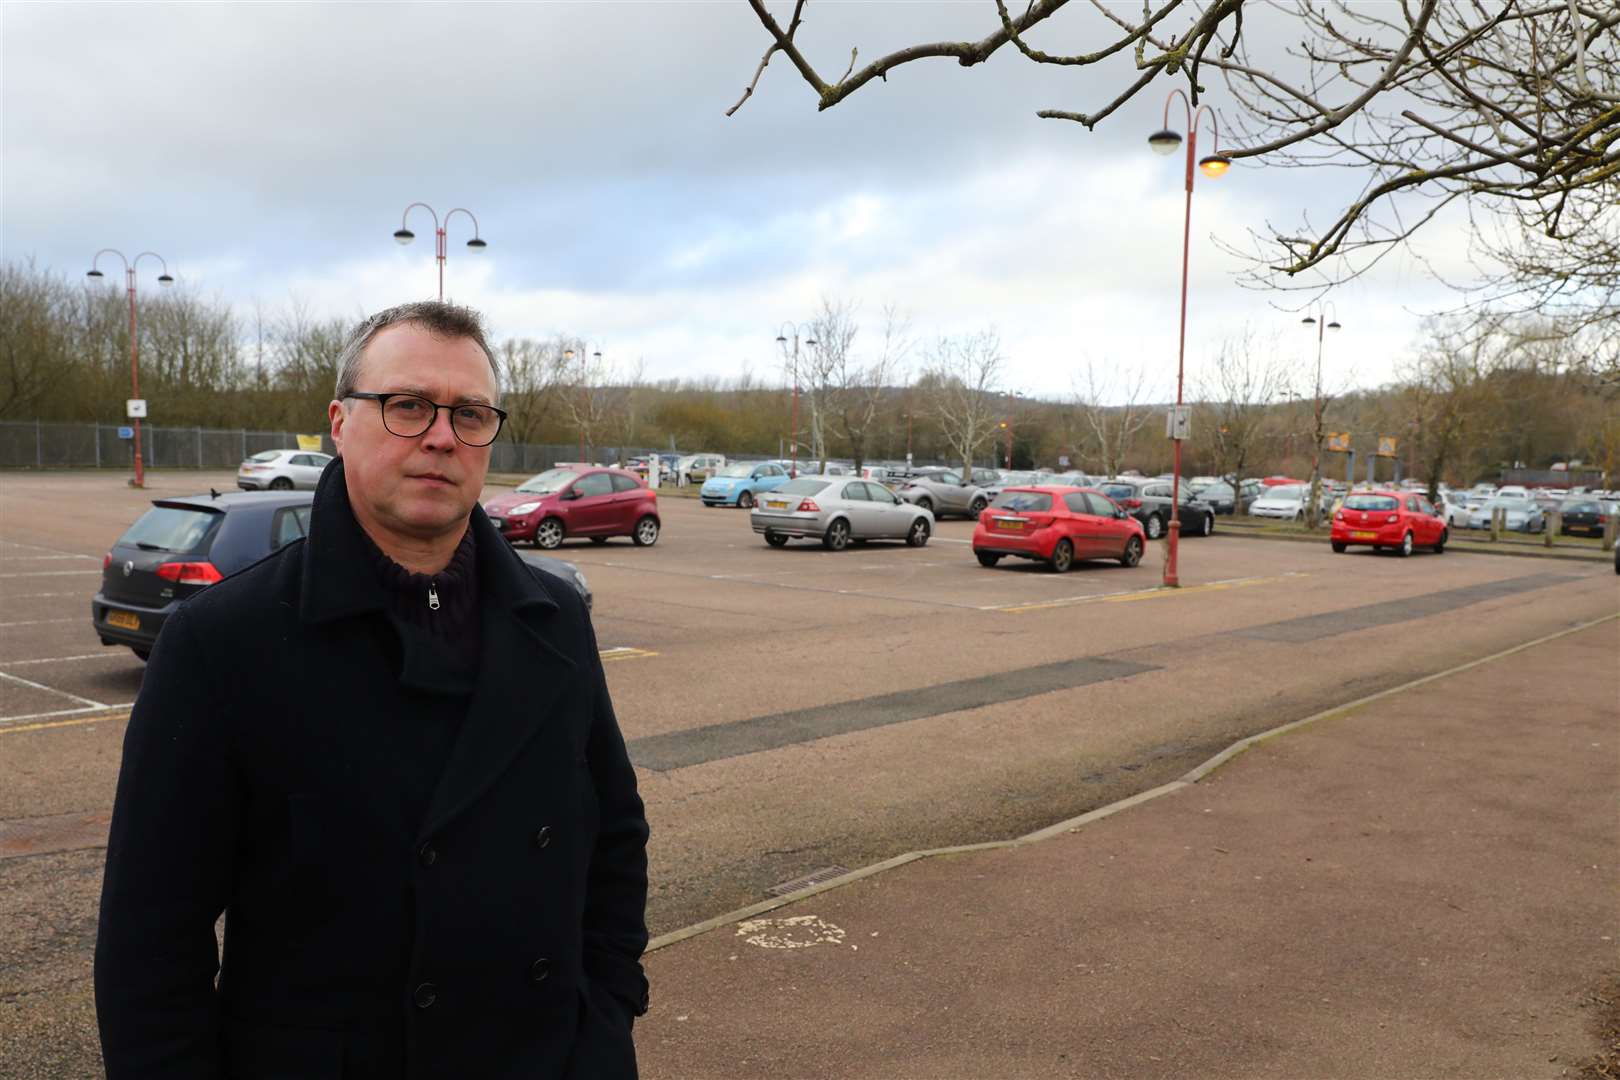 David Lilford believes the Sunday boot fair at the Wincheap Park and Ride is hurting high street trade